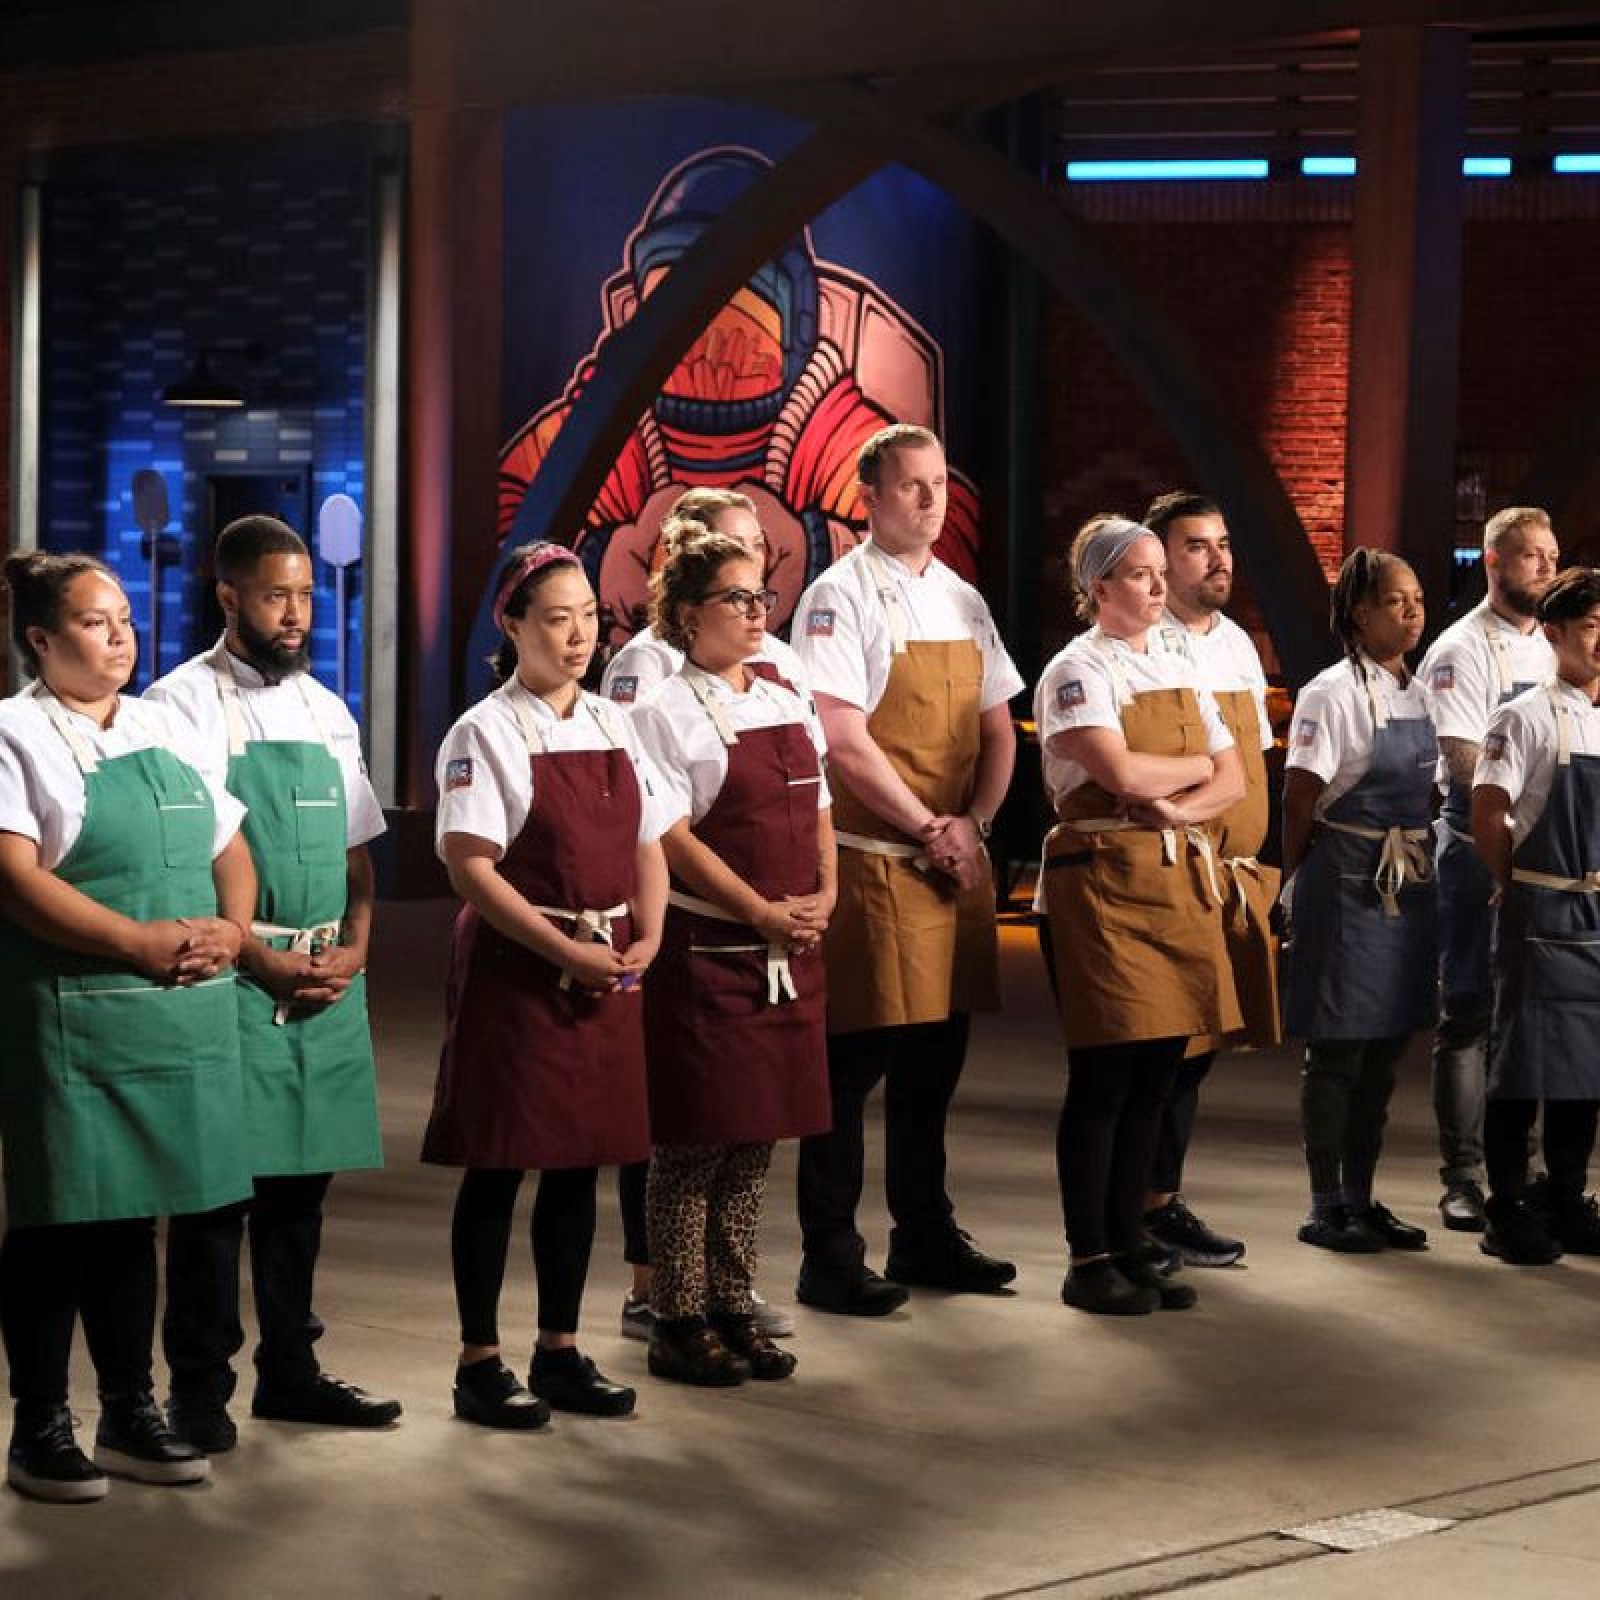 Top Chef Season 19 - Release Date, Judges, And More